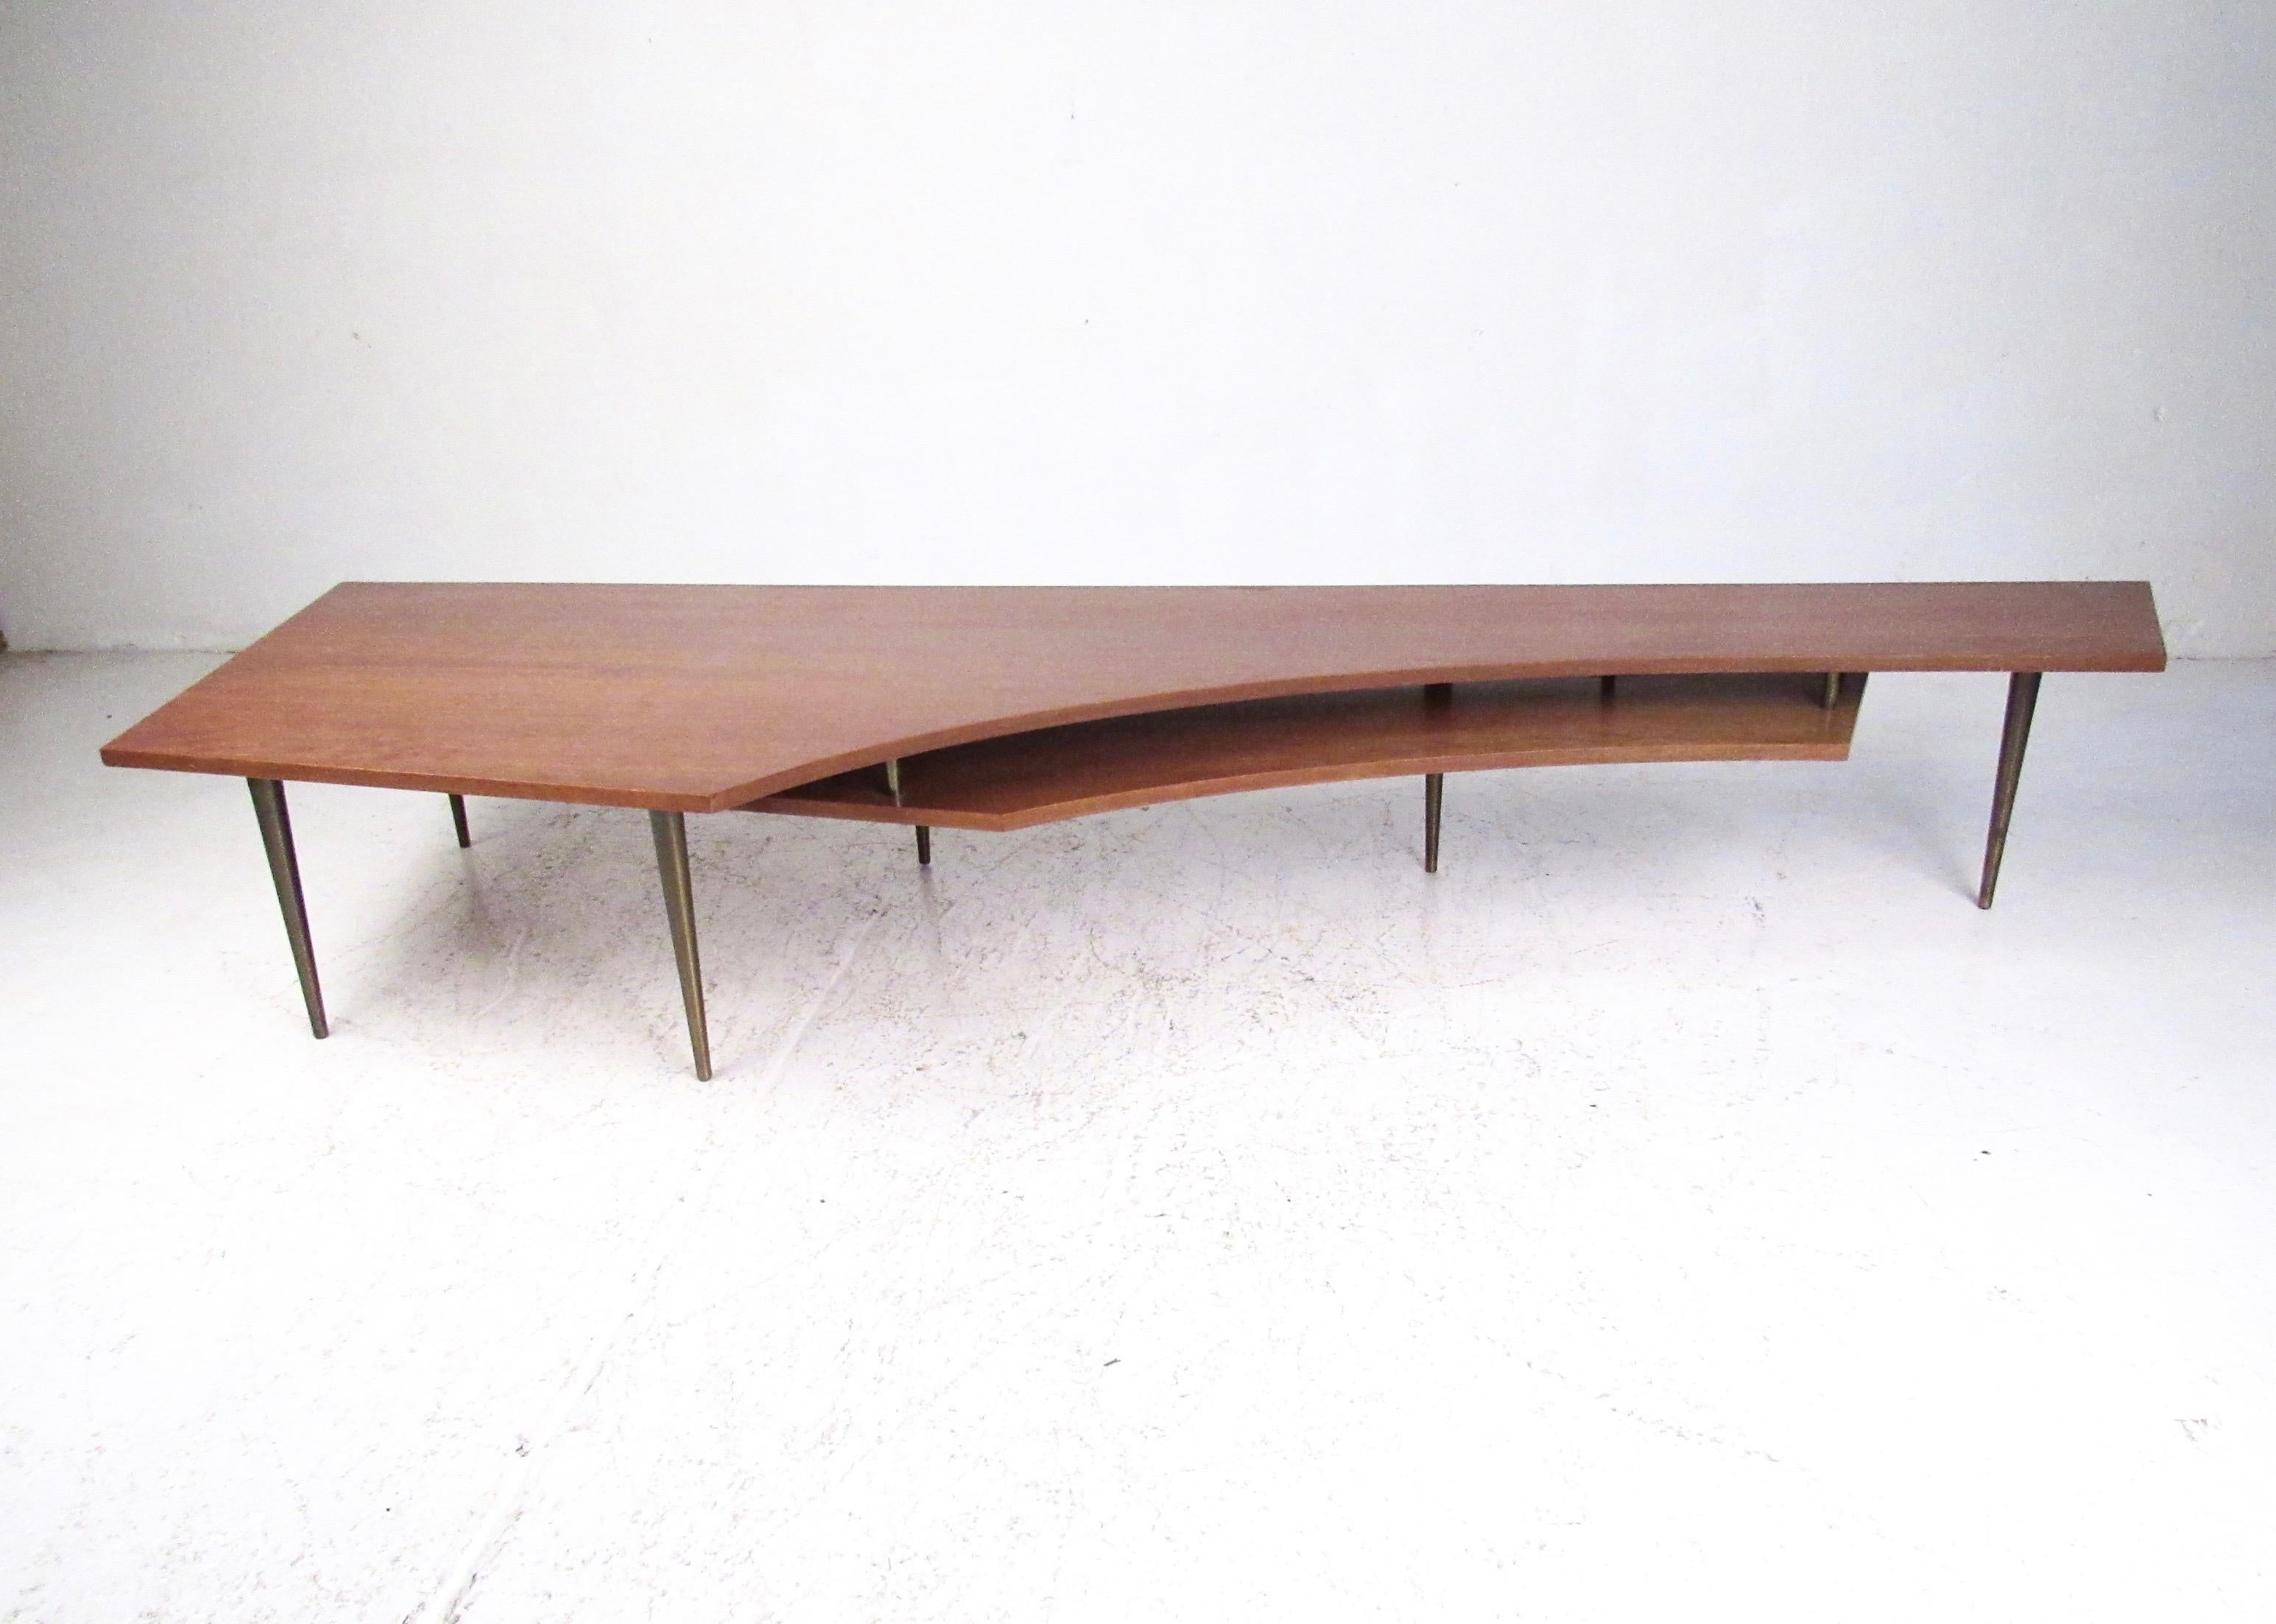 This large-scale two-tier coffee table features distinctive midcentury design, tapered bronze finish legs, and geometrically shaped cut away tabletop. The unique shape makes this an ideal cocktail table for home or business sofa seating areas,